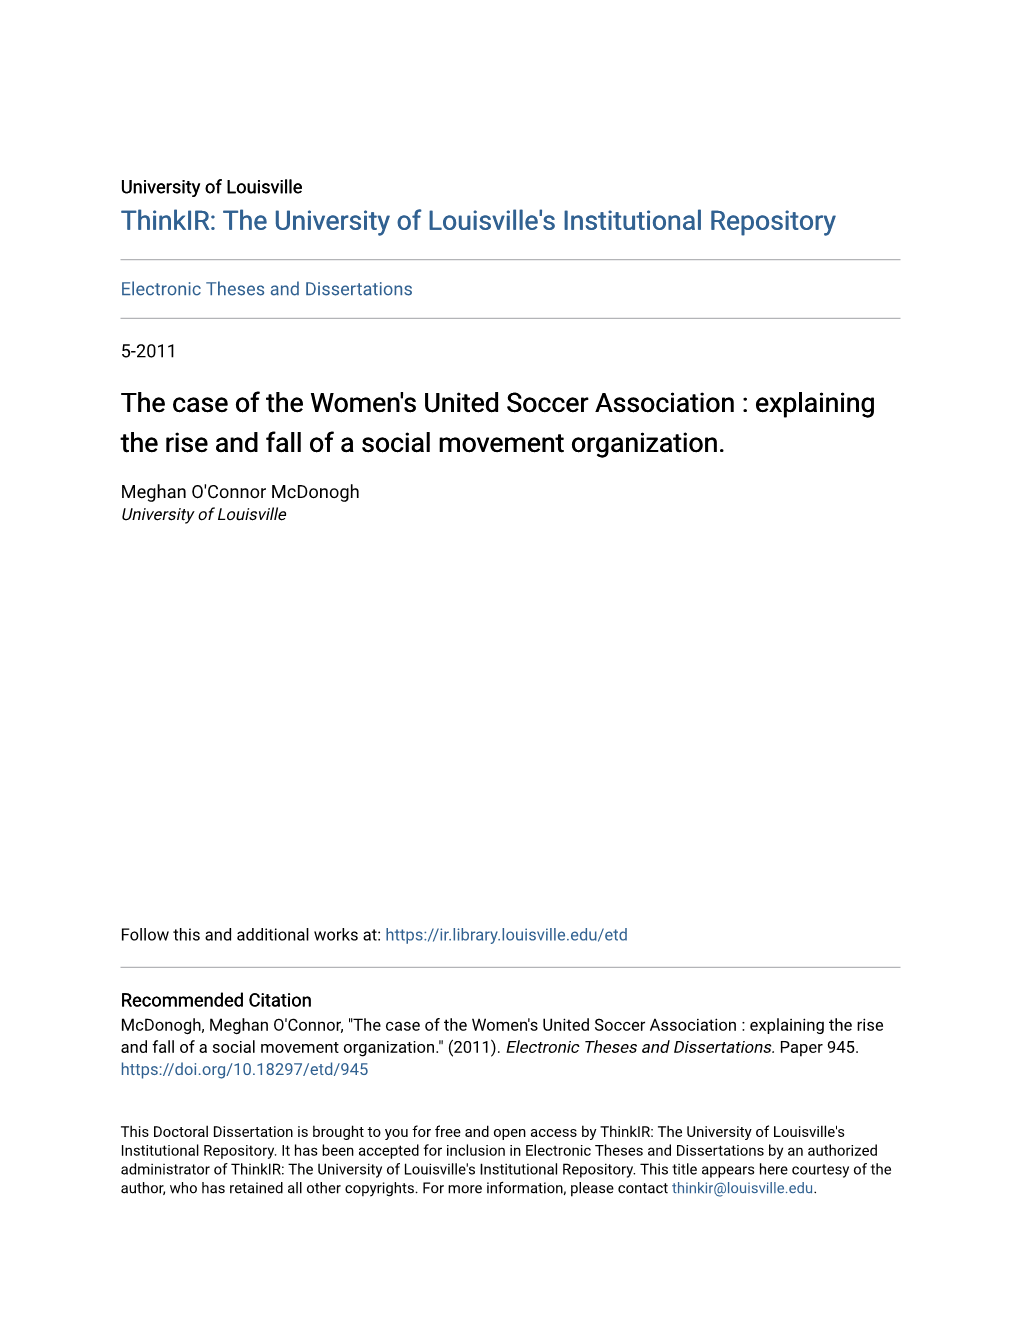 The Case of the Women's United Soccer Association : Explaining the Rise and Fall of a Social Movement Organization